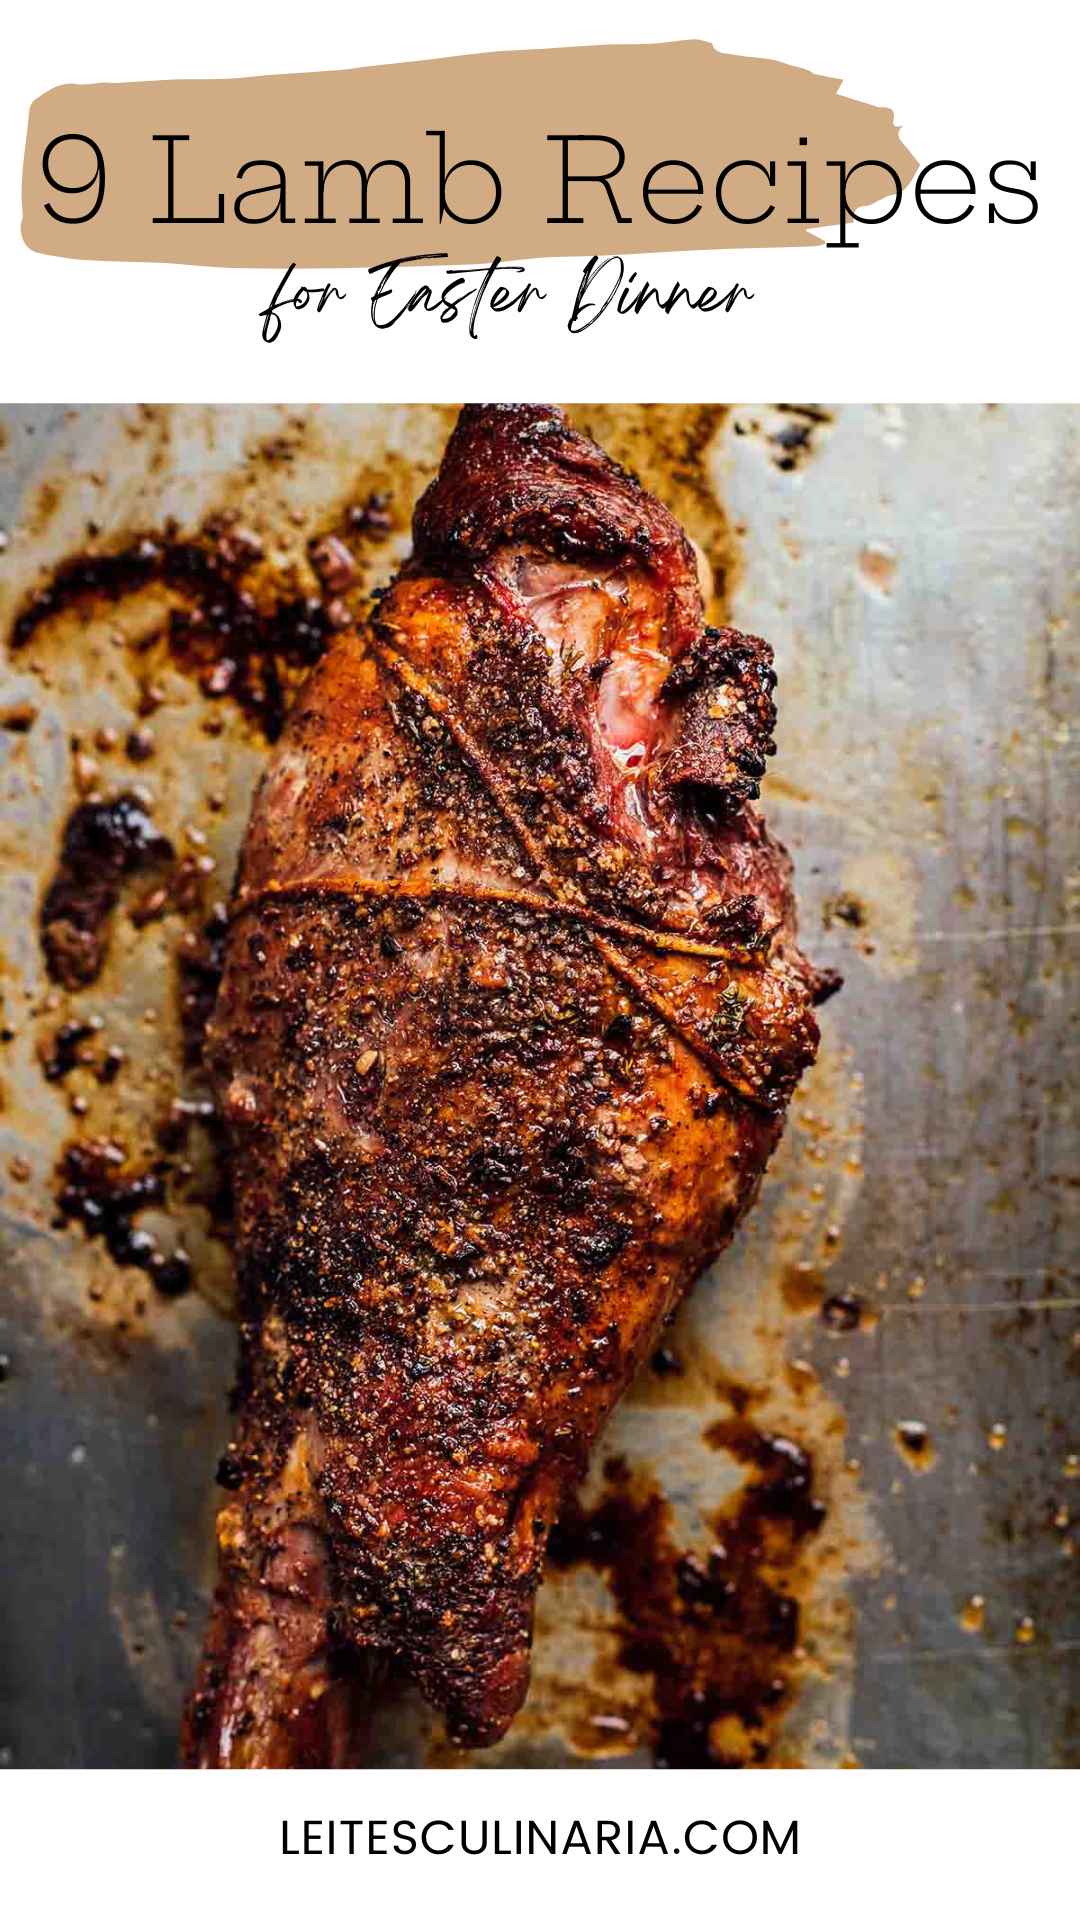 A roasted leg of lamb with spice rub.